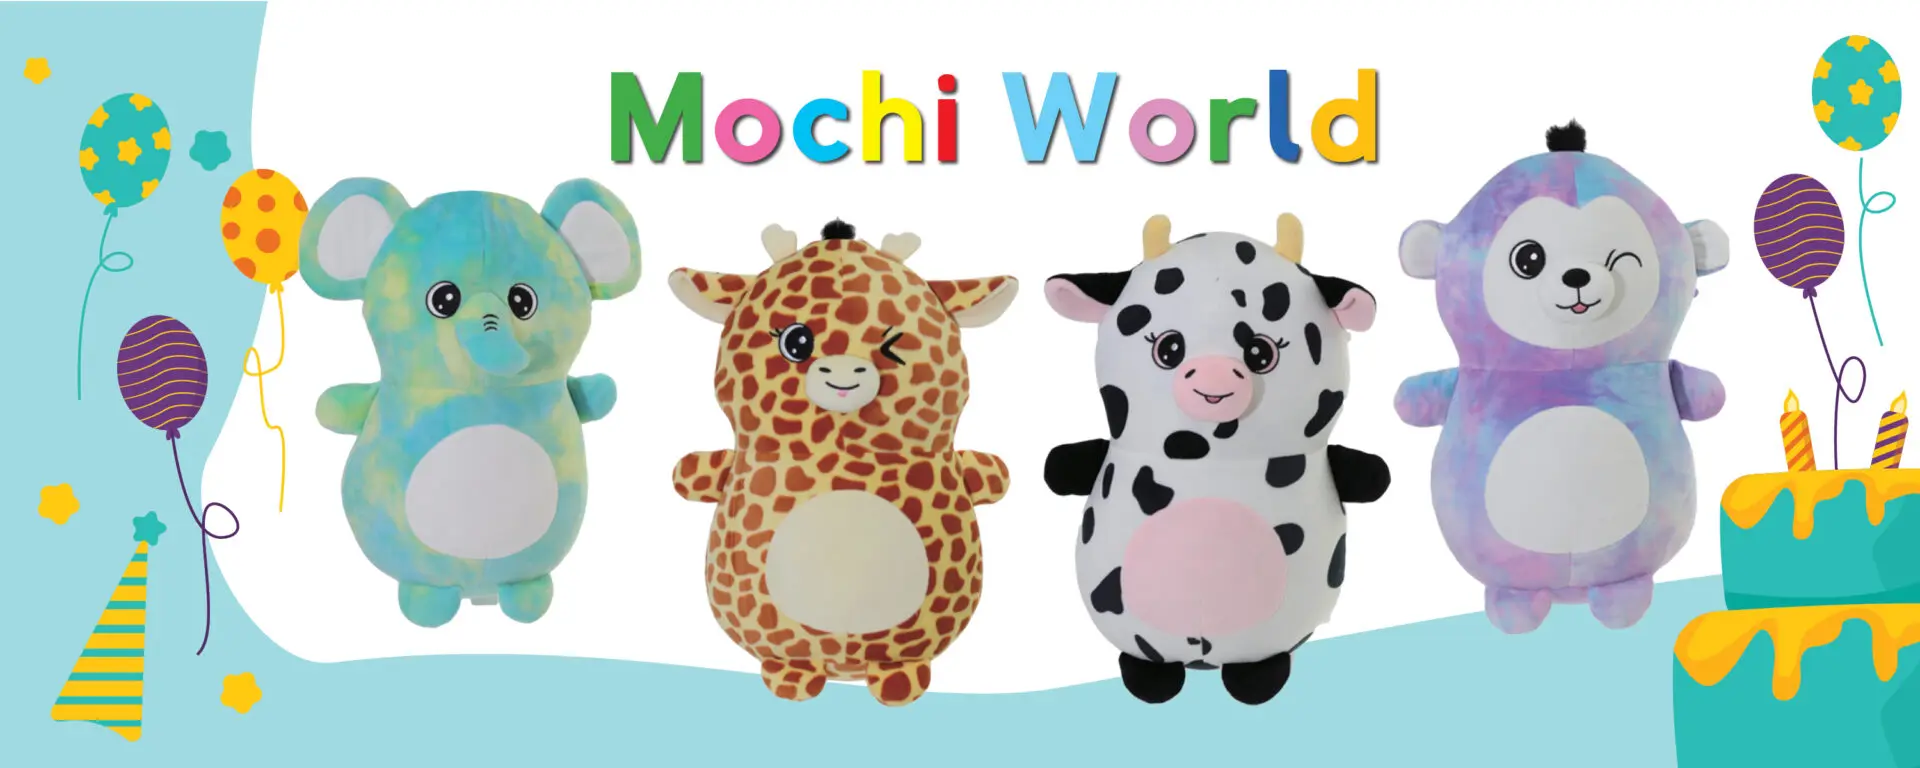 A group of stuffed animals that are sitting in front of the words mochi world.